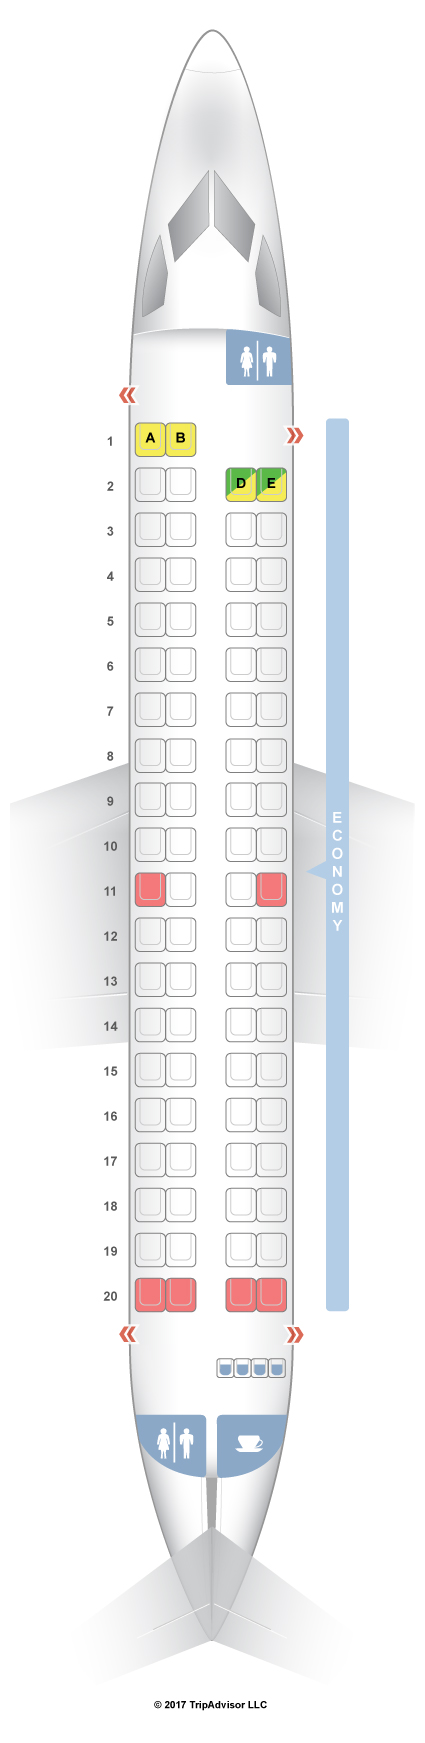 Dhc 8 Seating Chart